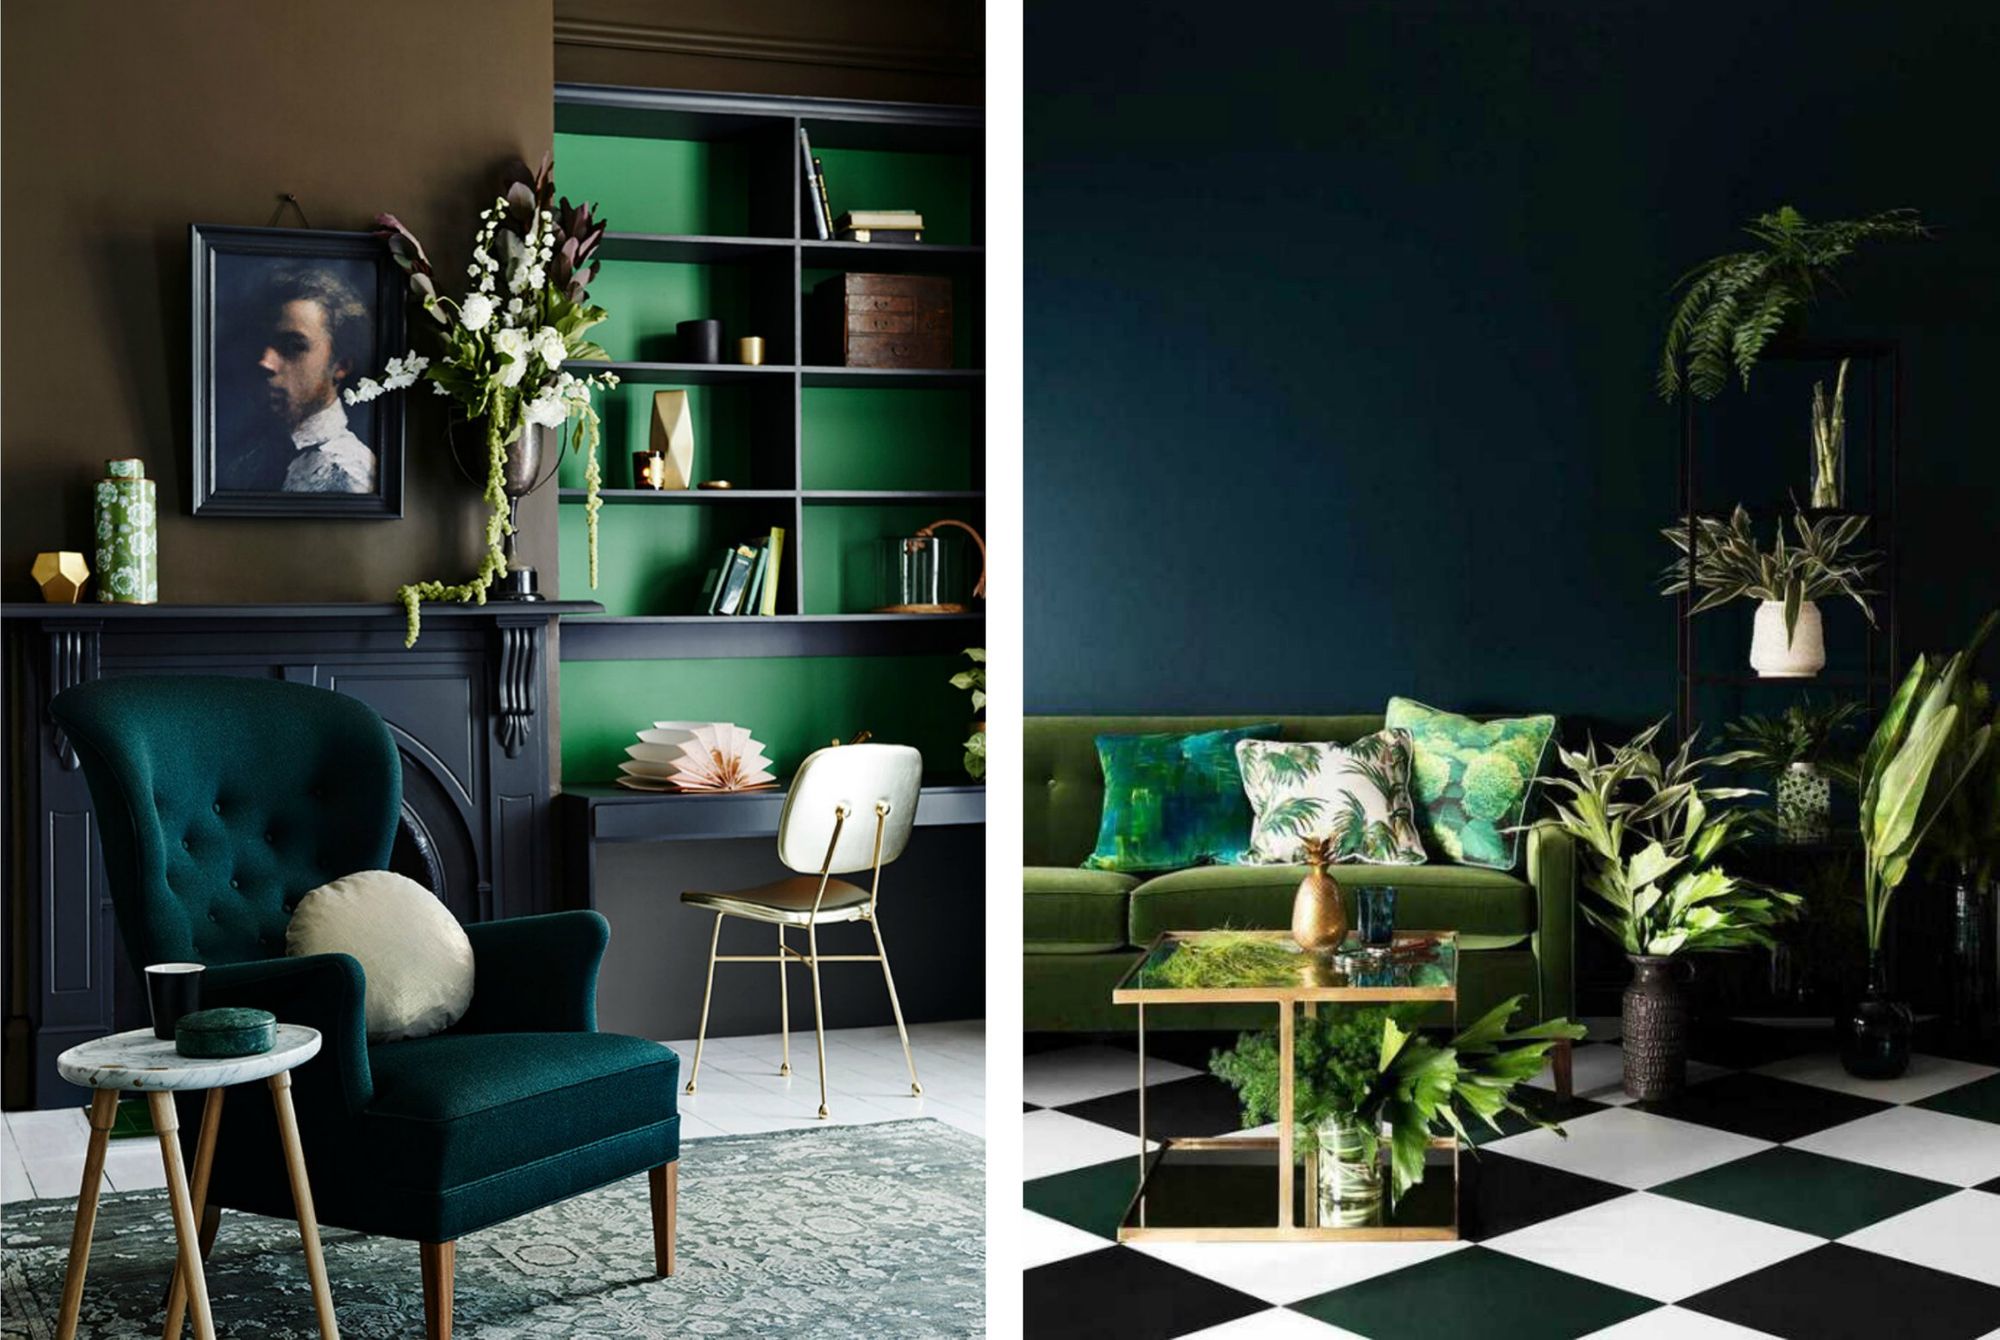 Color accents - emerald green in decorations